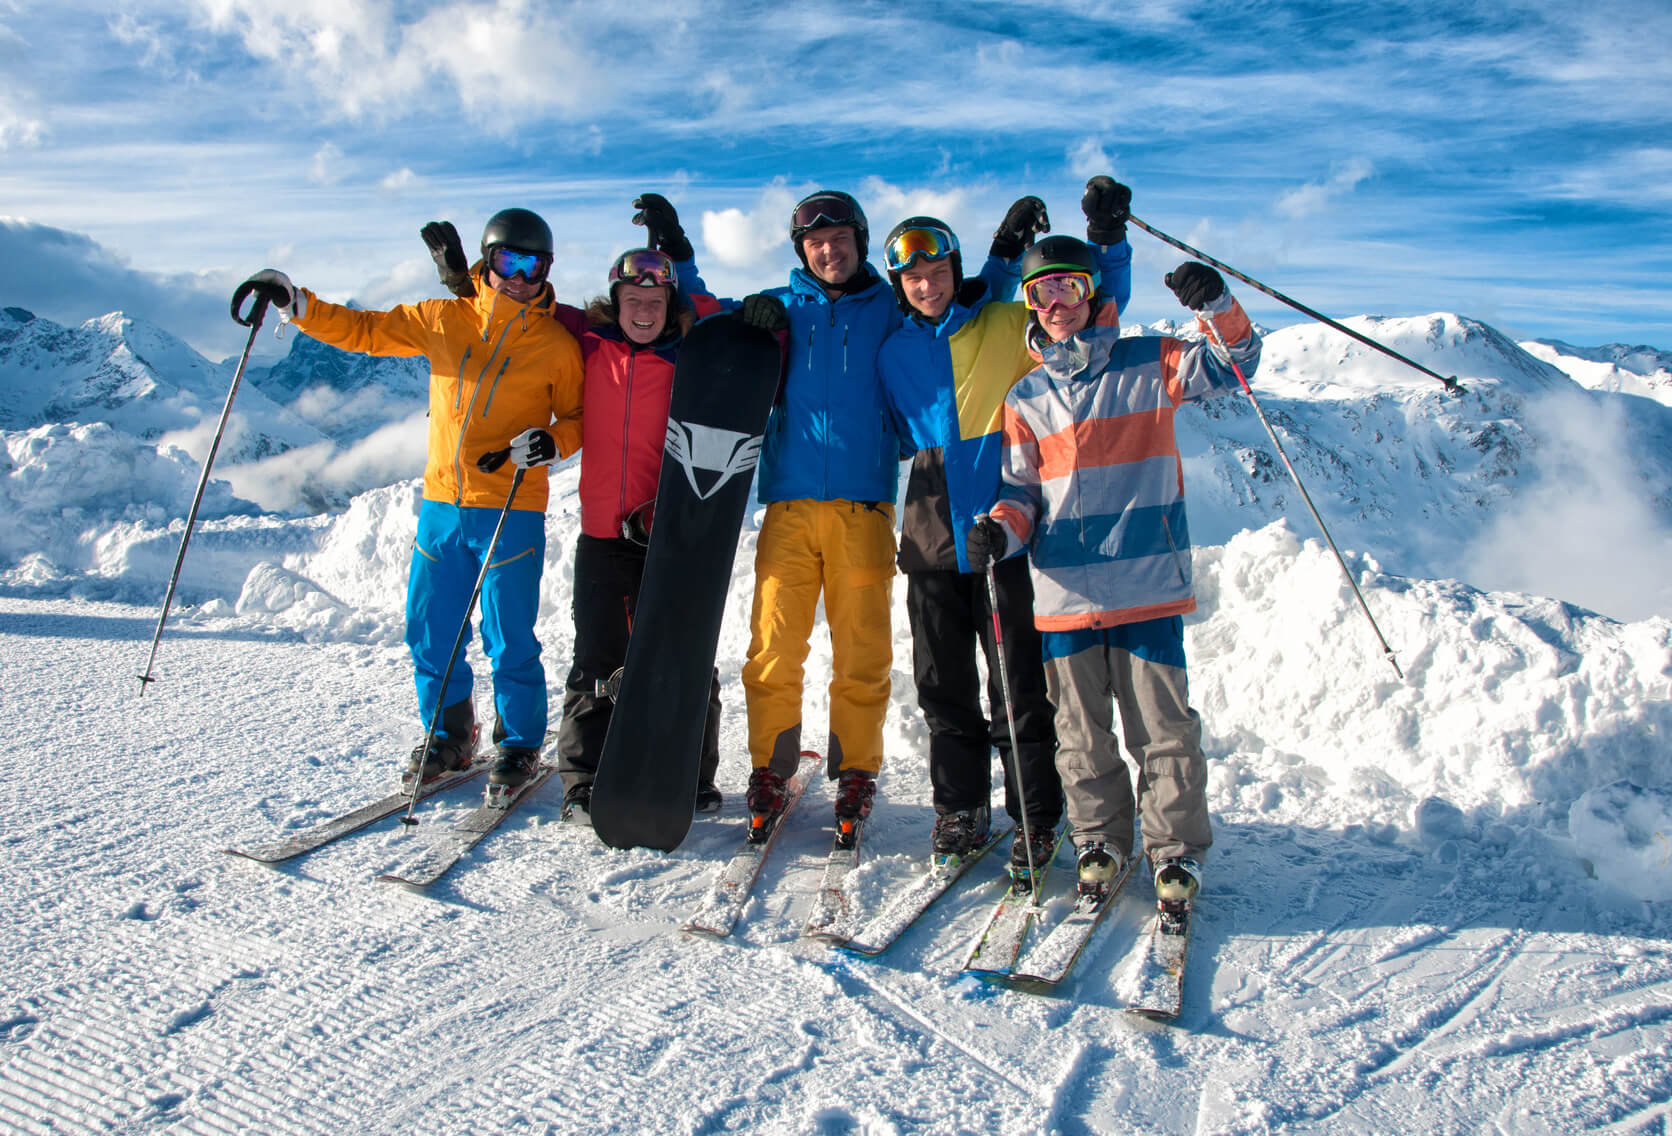 Group of 5 young men with skis on top of a mountain in the snow